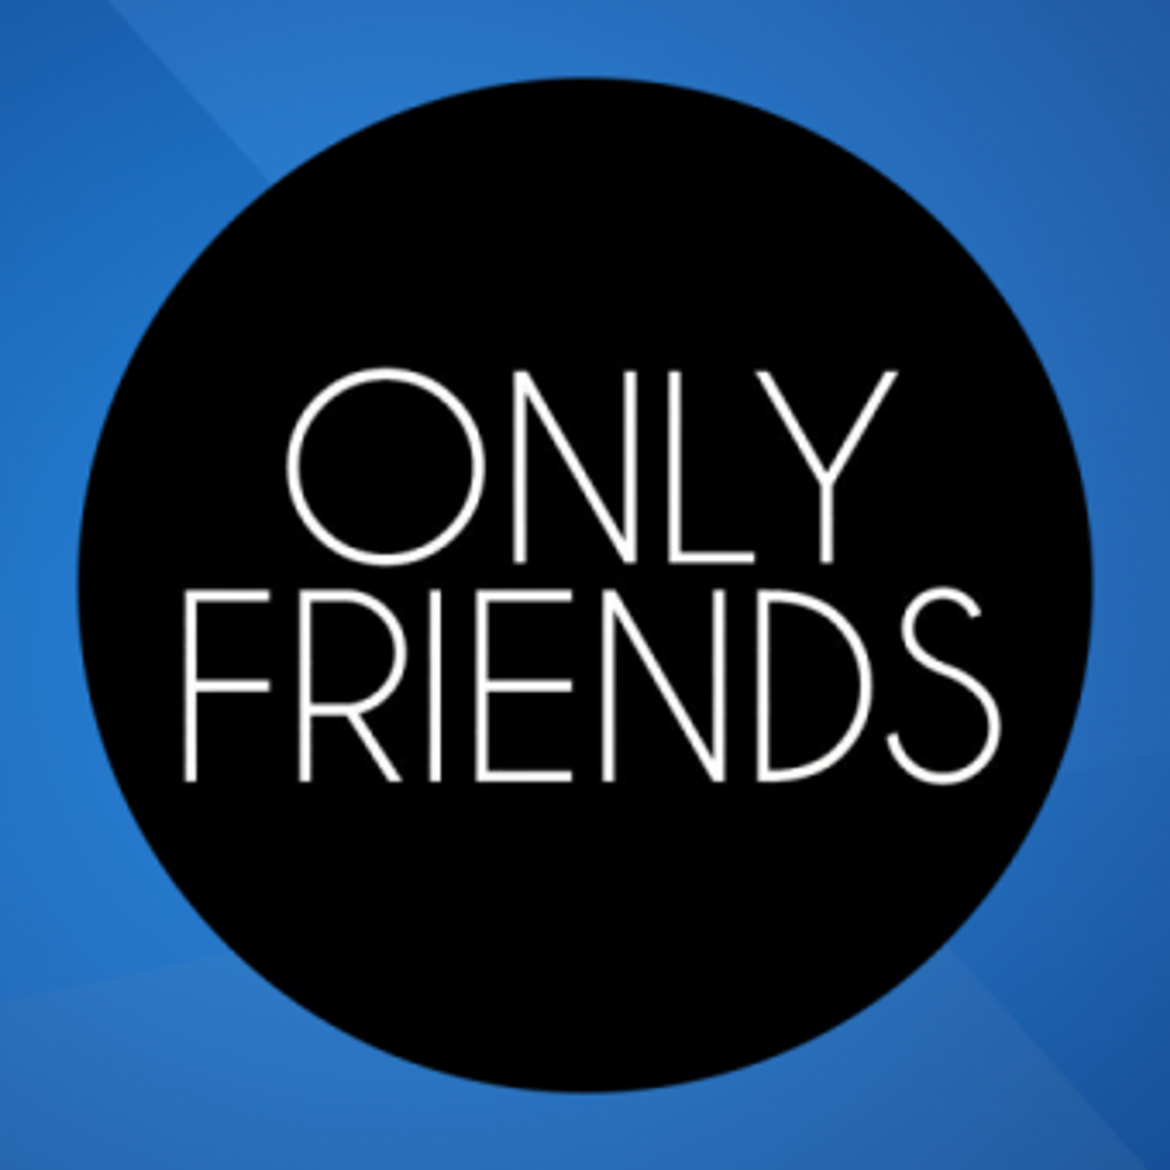 Only friends 3